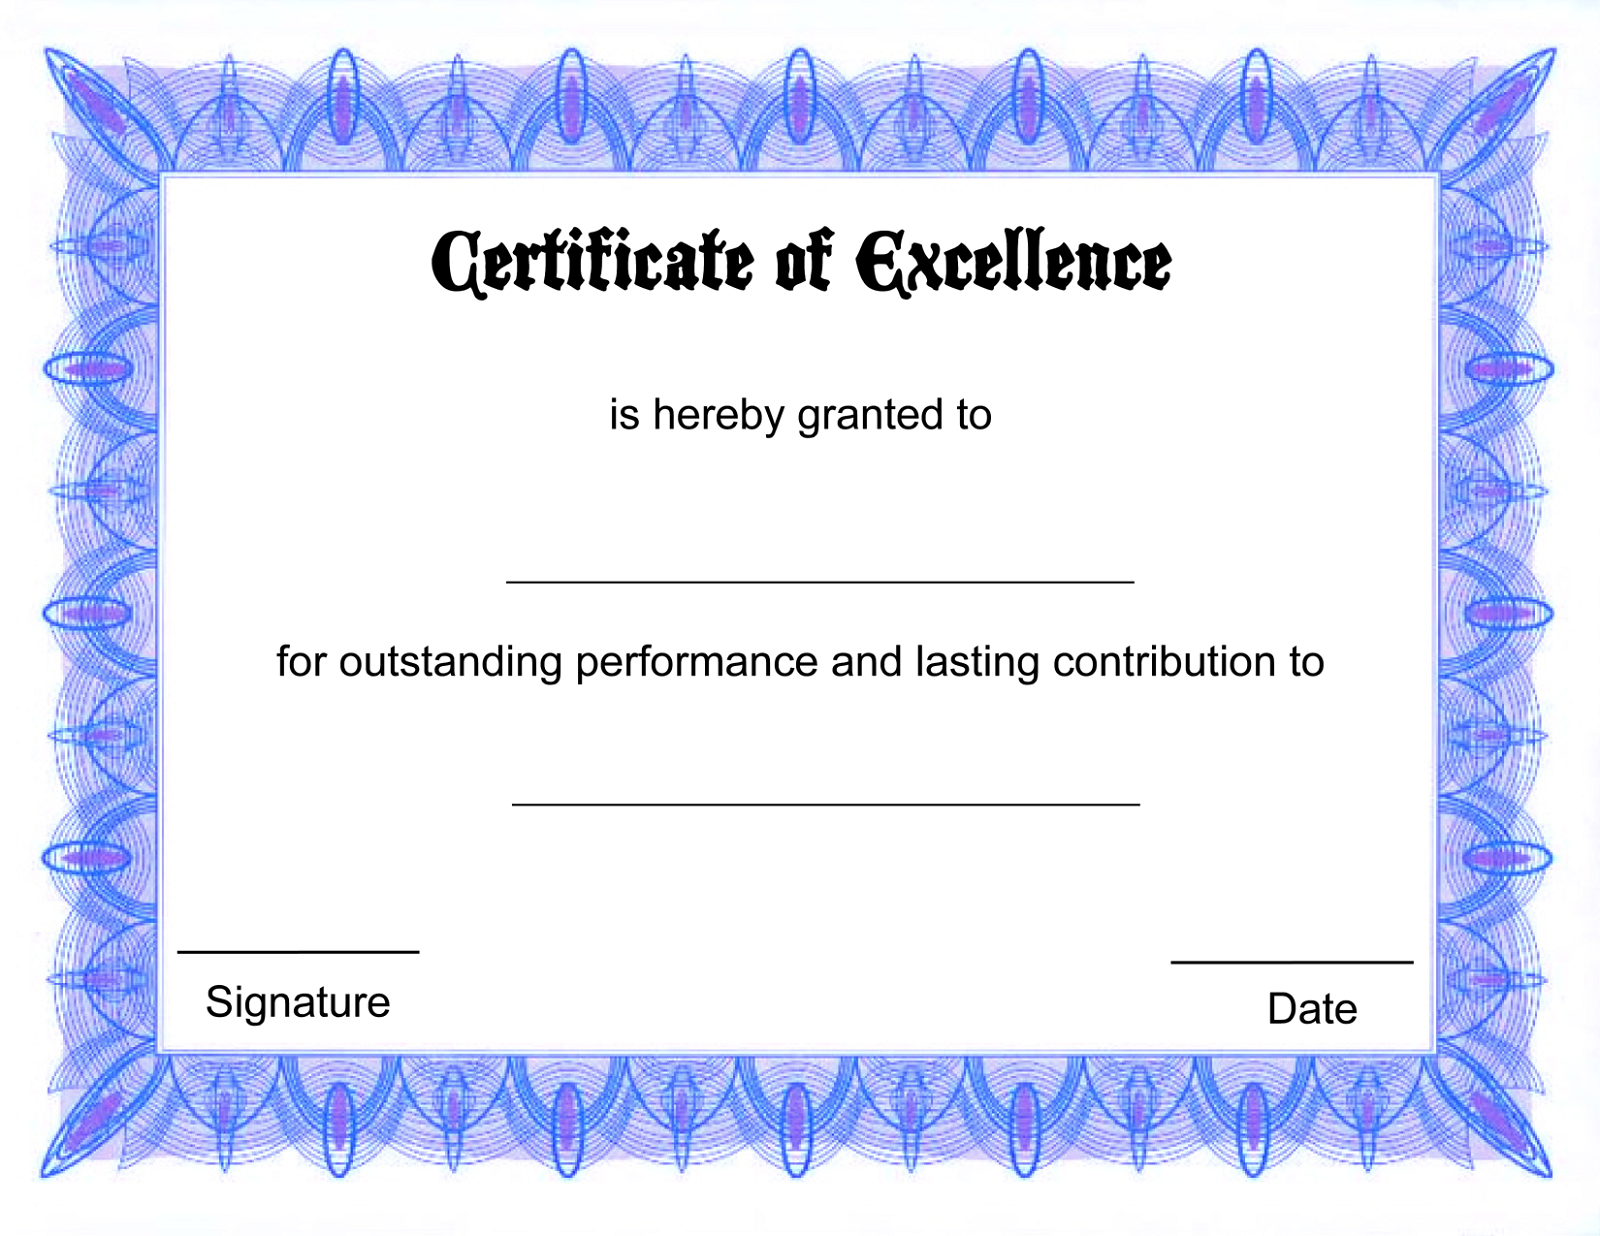 Blank Certificate Templates to Print | Activity Shelter
 Blank Certificate Templates For Word Free